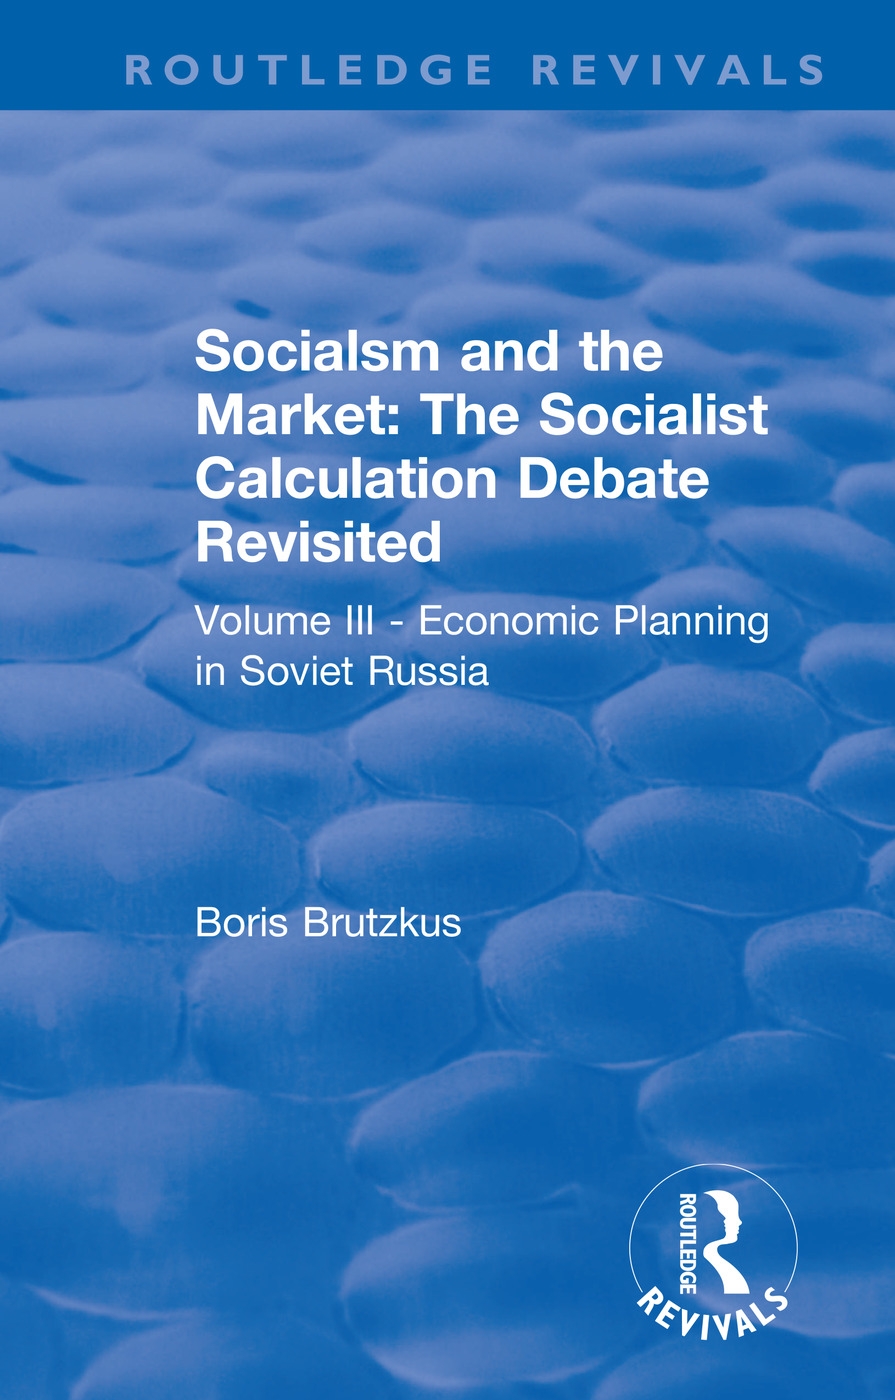 Revival: Economic Planning in Soviet Russia (1935): Socialsm and the Market (Volume III)